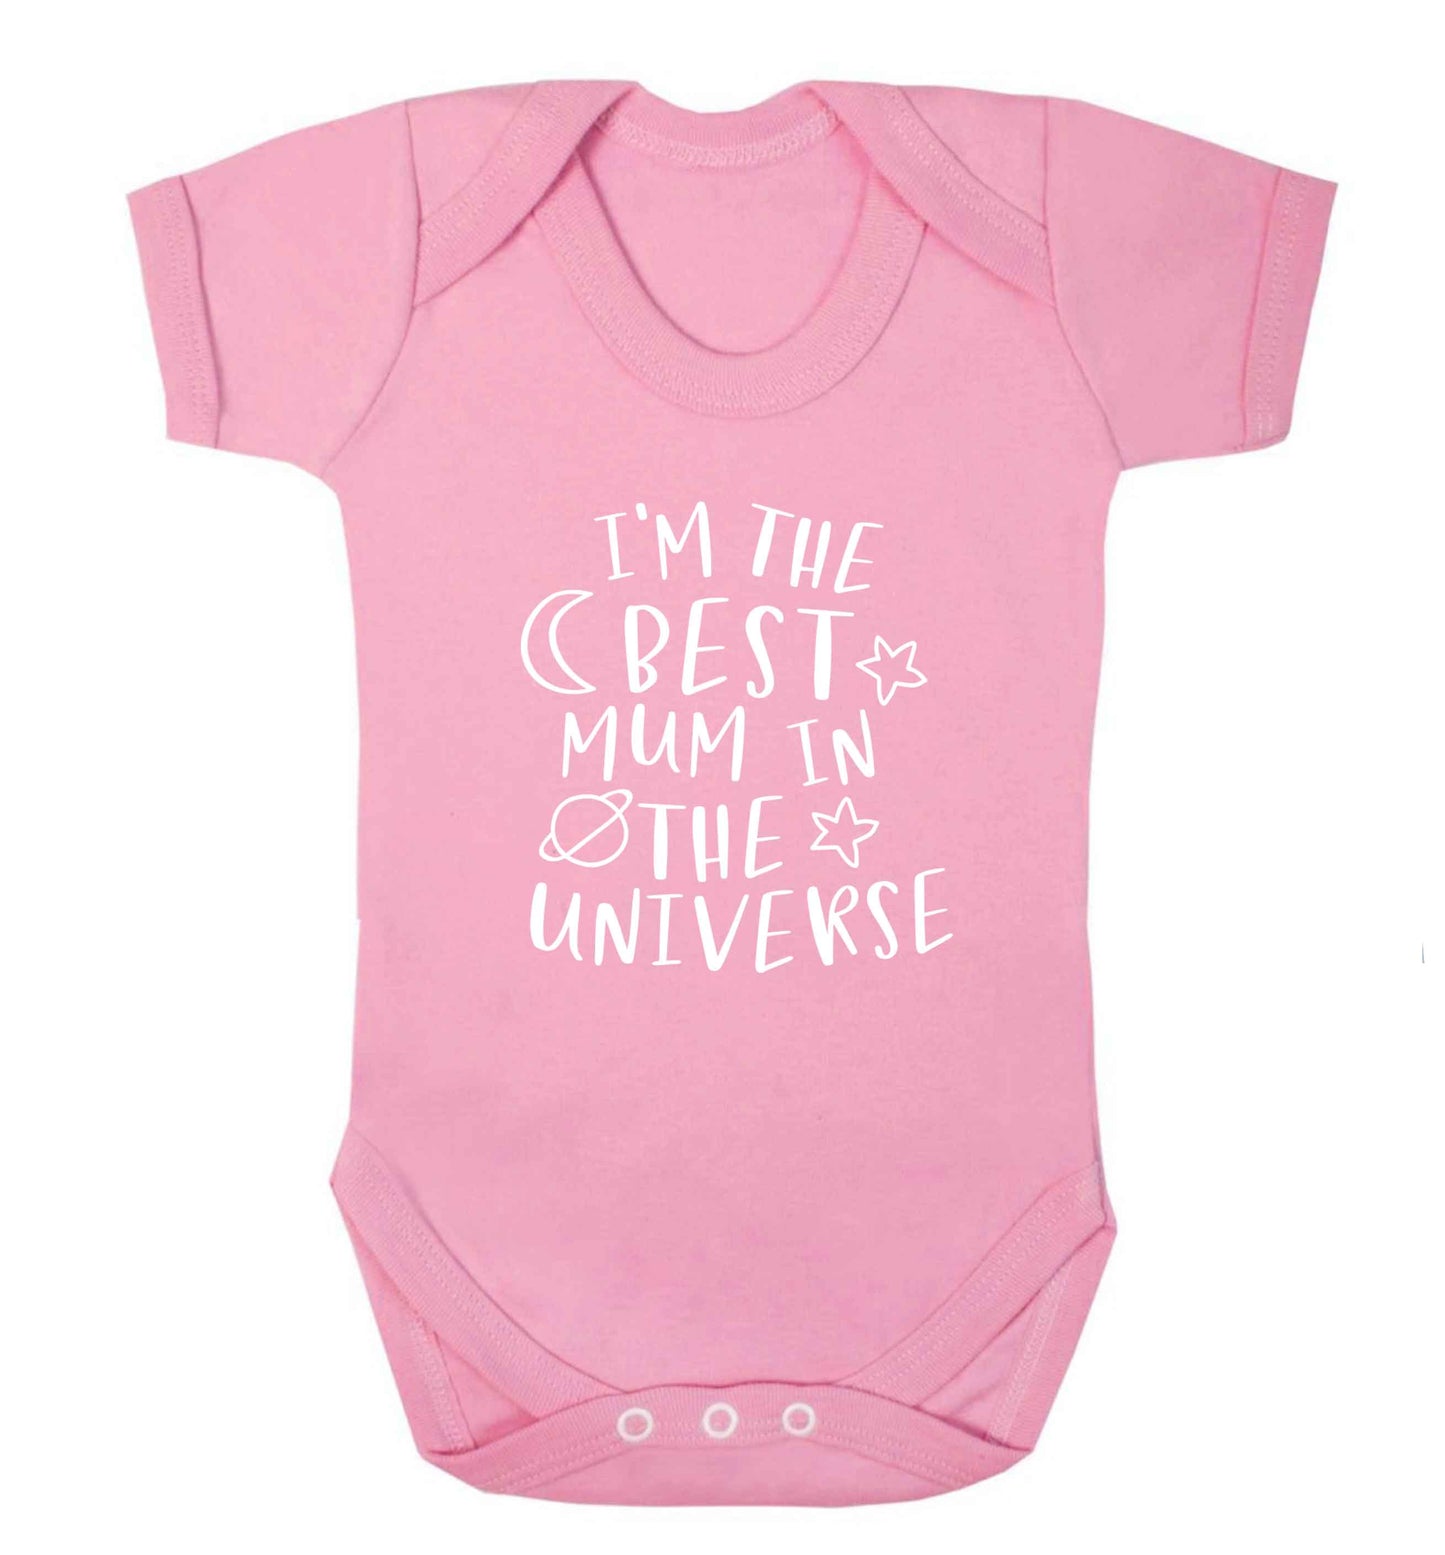 I'm the best mum in the universe baby vest pale pink 18-24 months